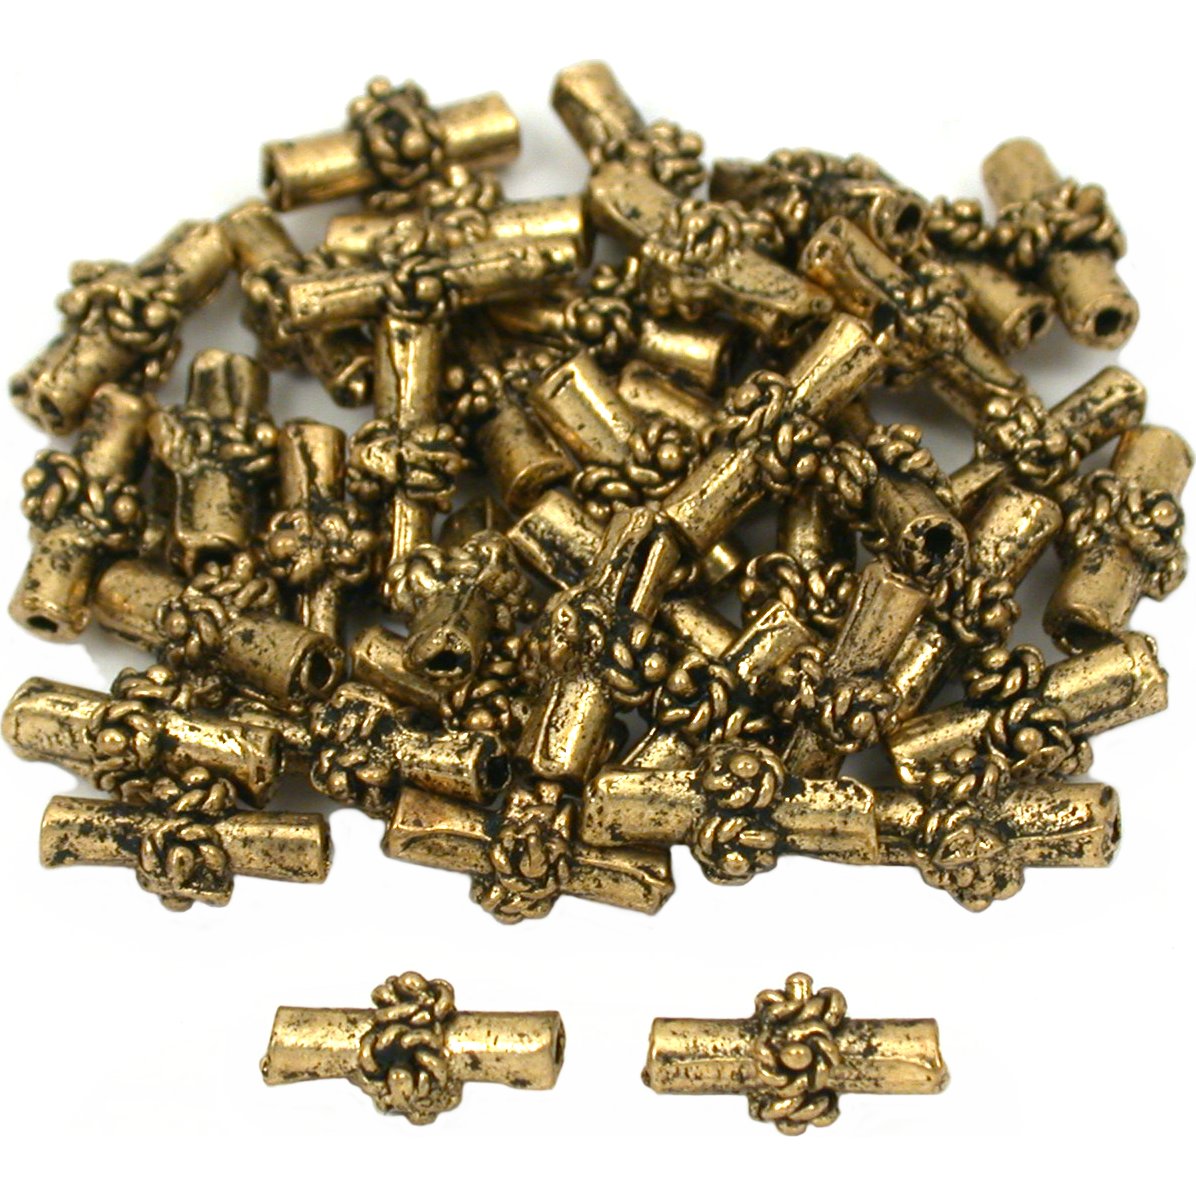 Bali Tube Rope Antique Gold Plated Beads 9.5mm 15 Grams 40Pcs Approx.